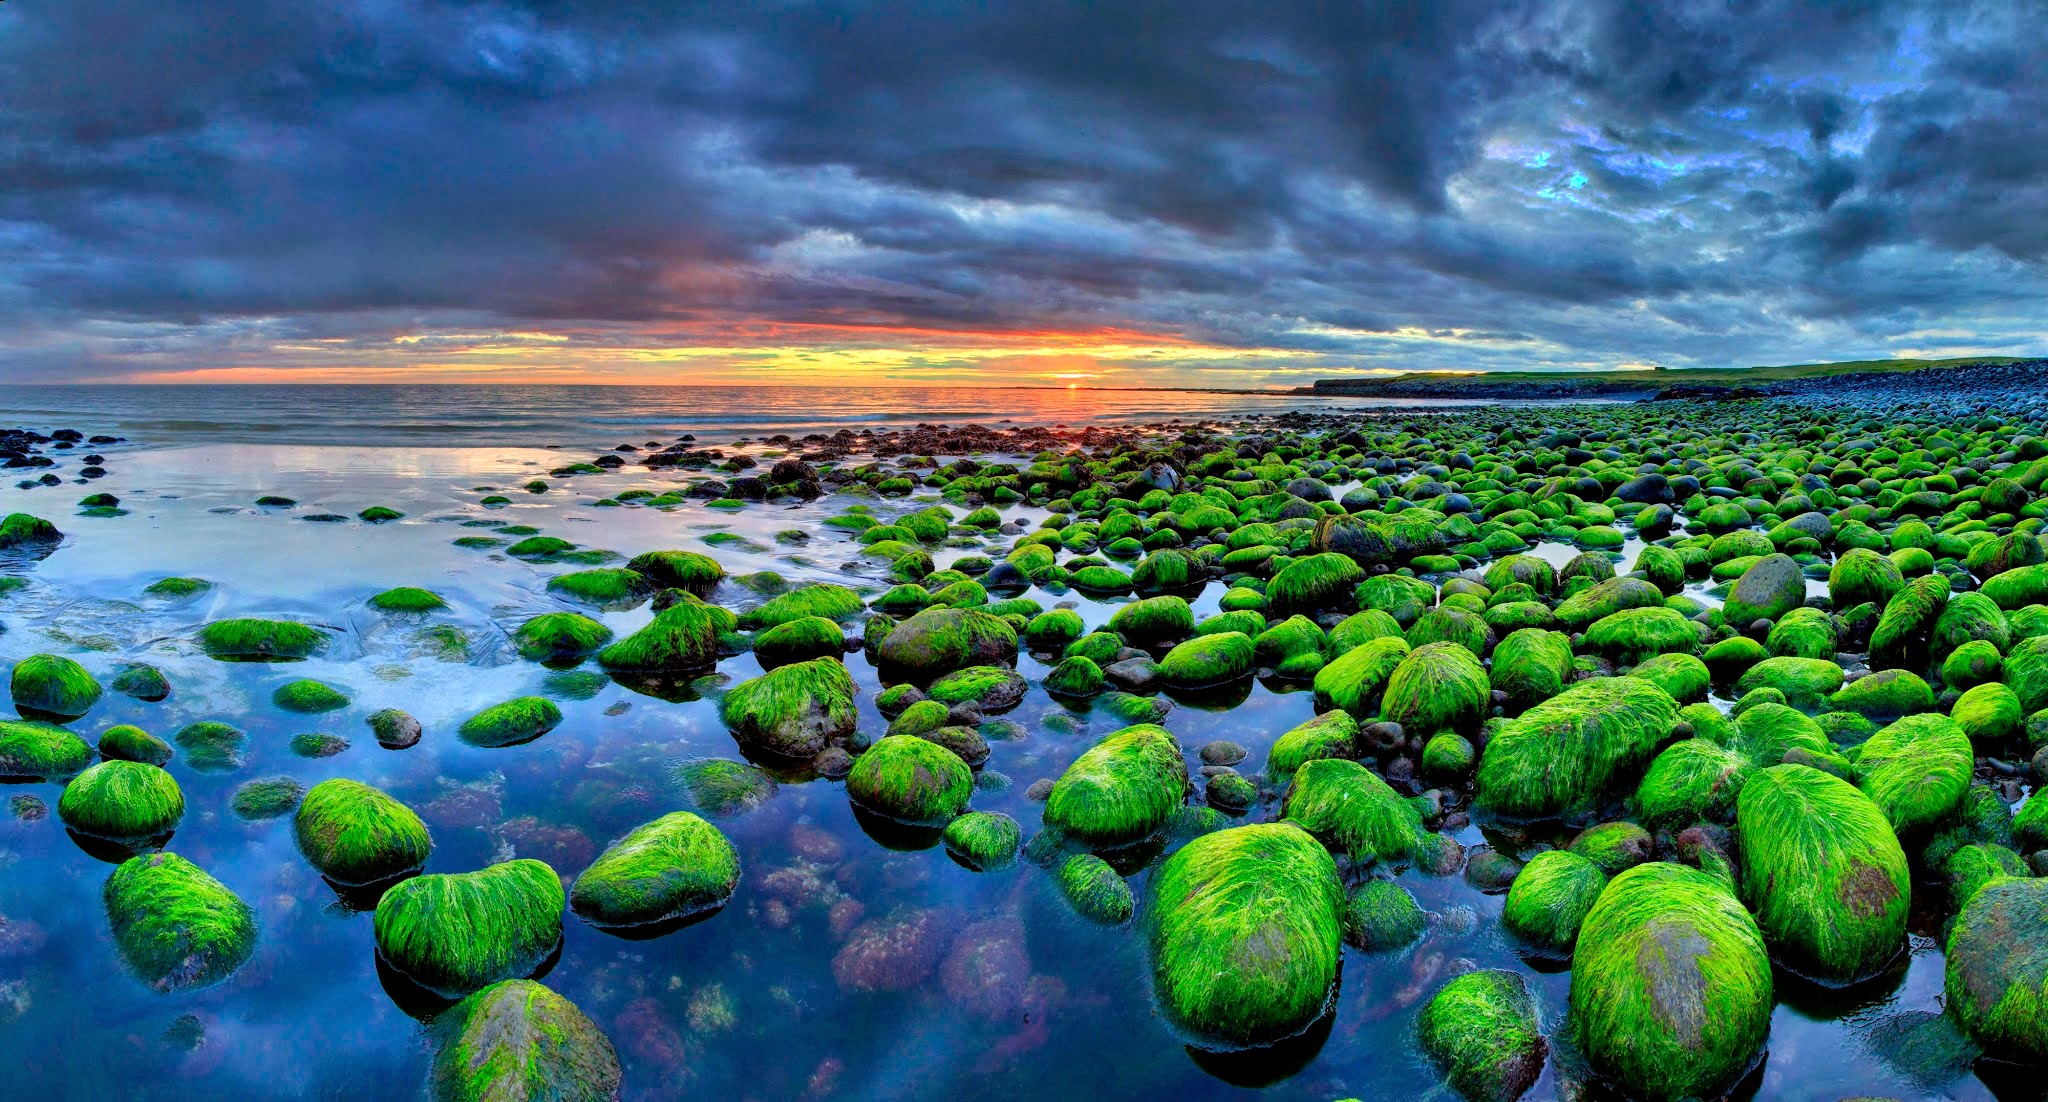 Moss covered rocks on a beach in Iceland - Imgur